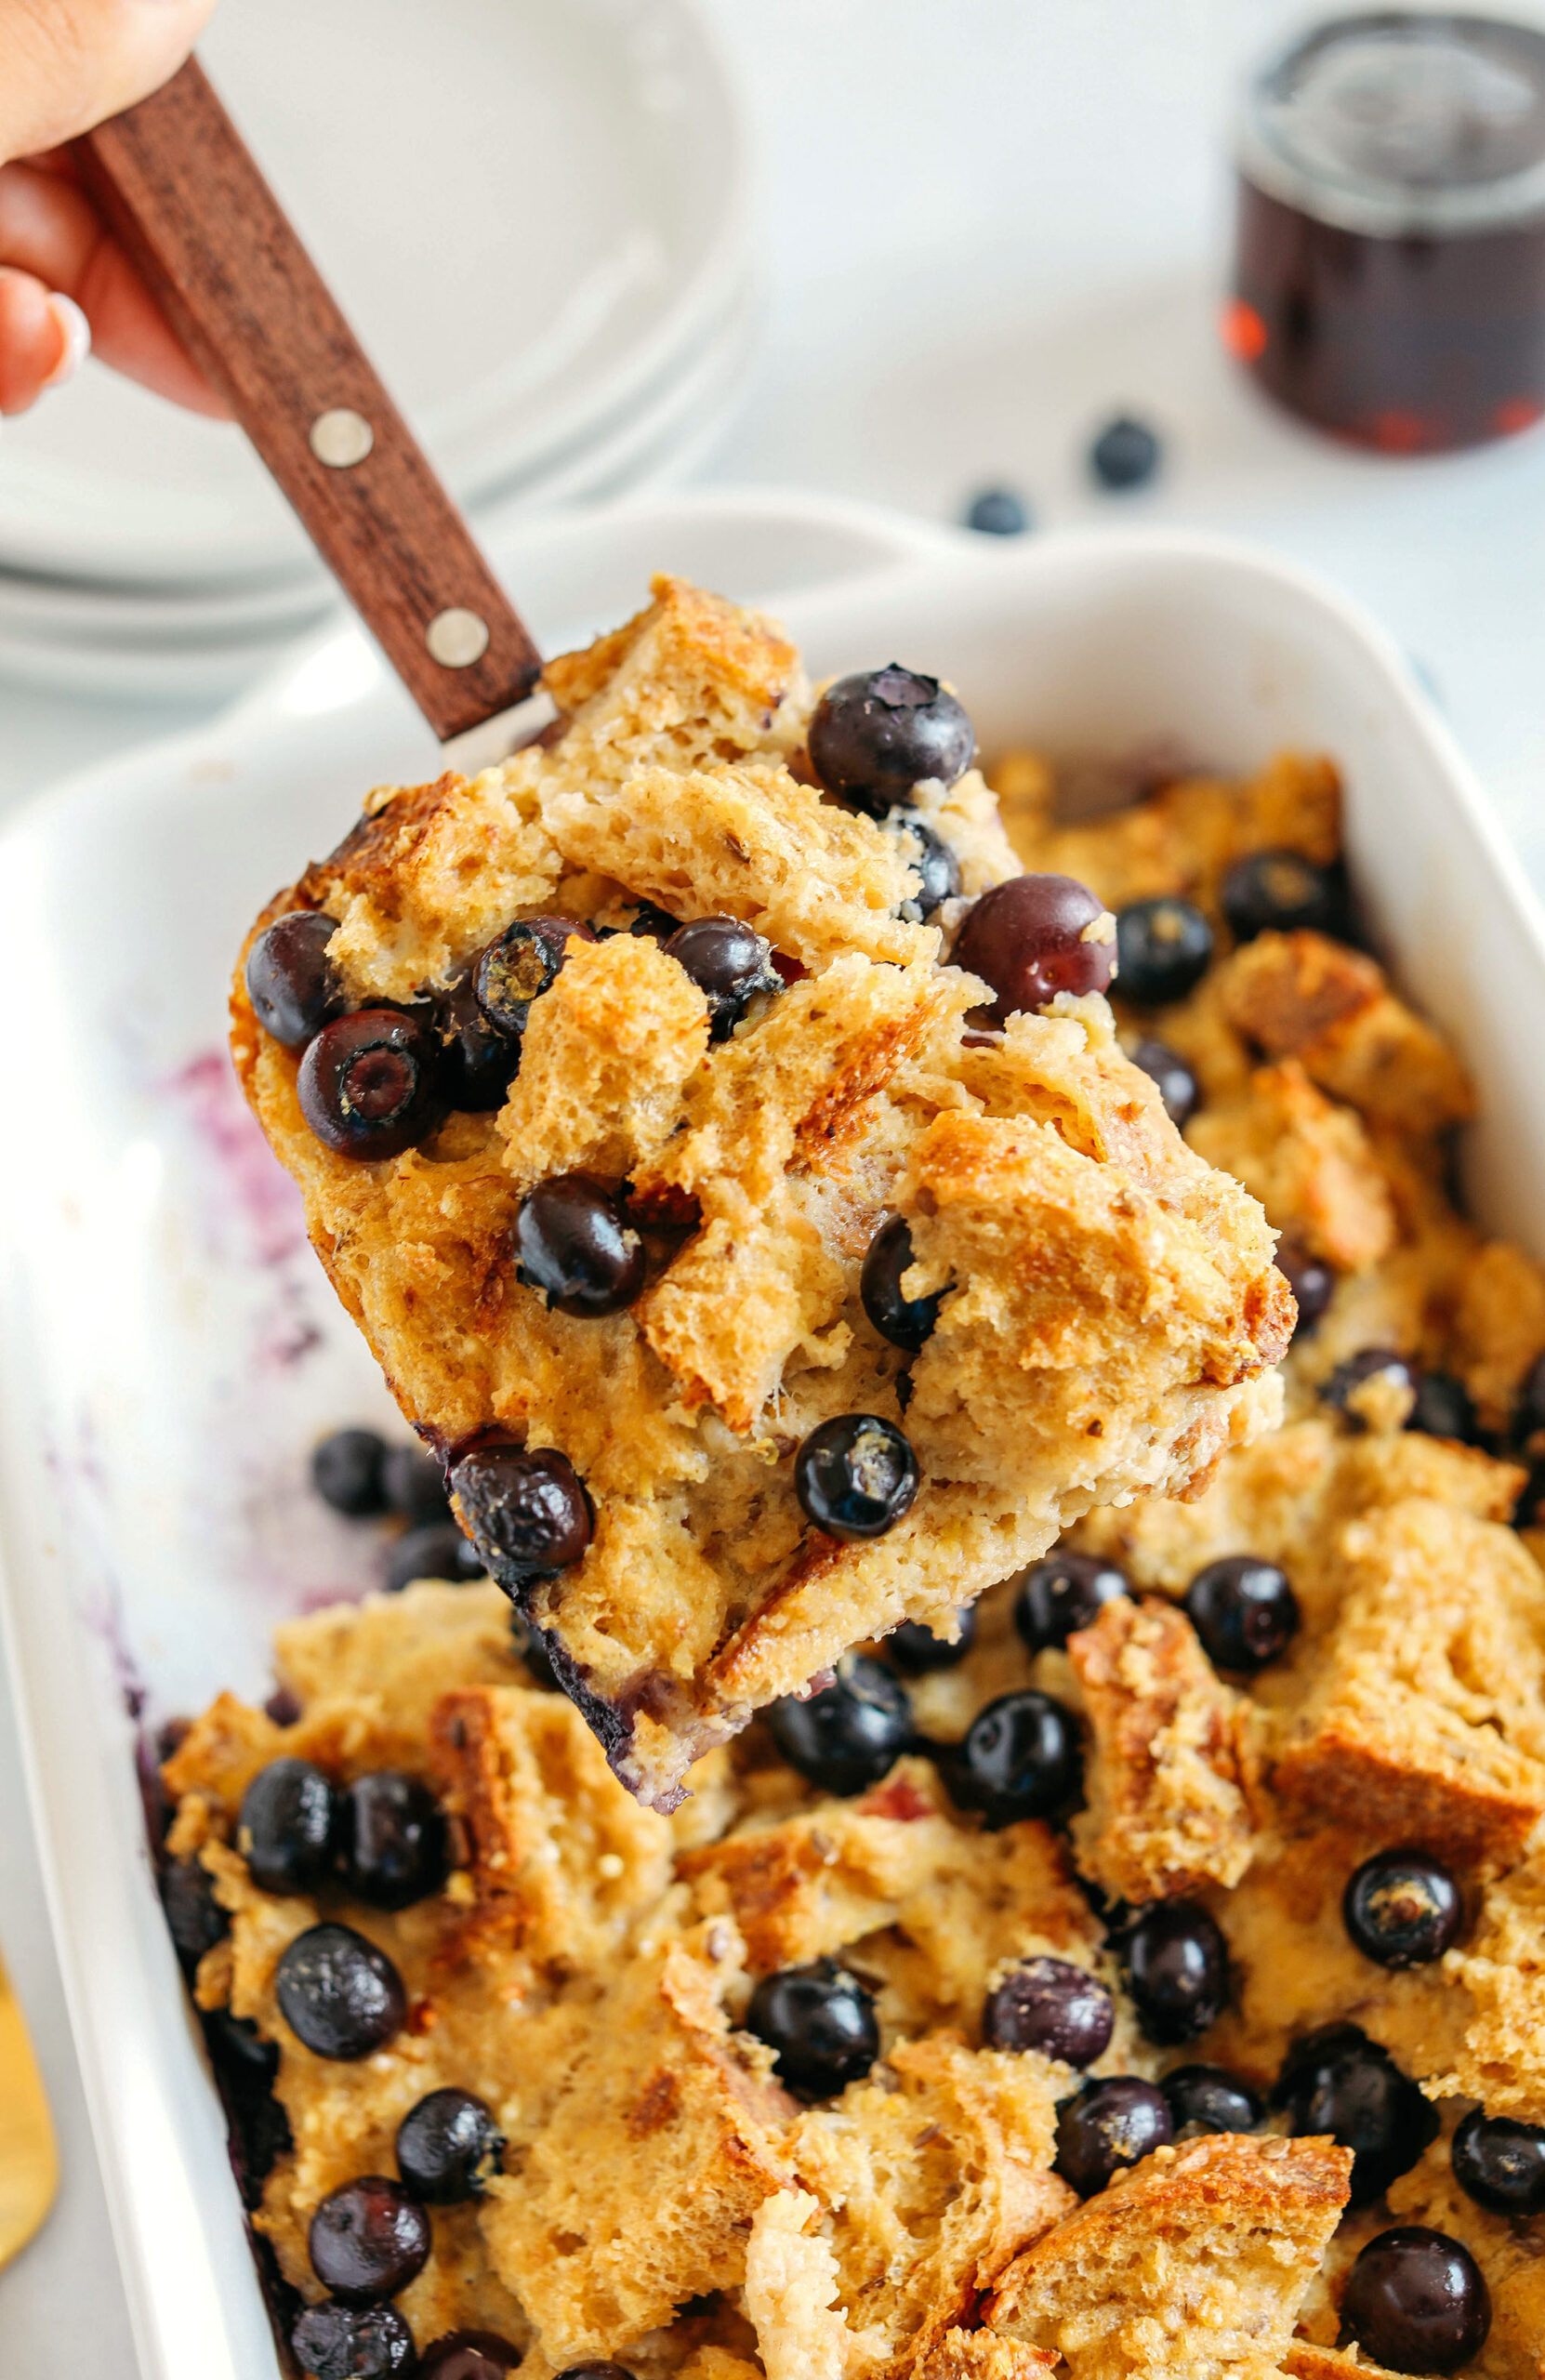 Warm and delicious Blueberry Lemon Bread Pudding lightened up with healthier ingredients and zero butter or refined sugar!  The perfect cozy dish for breakfast, brunch or dessert!